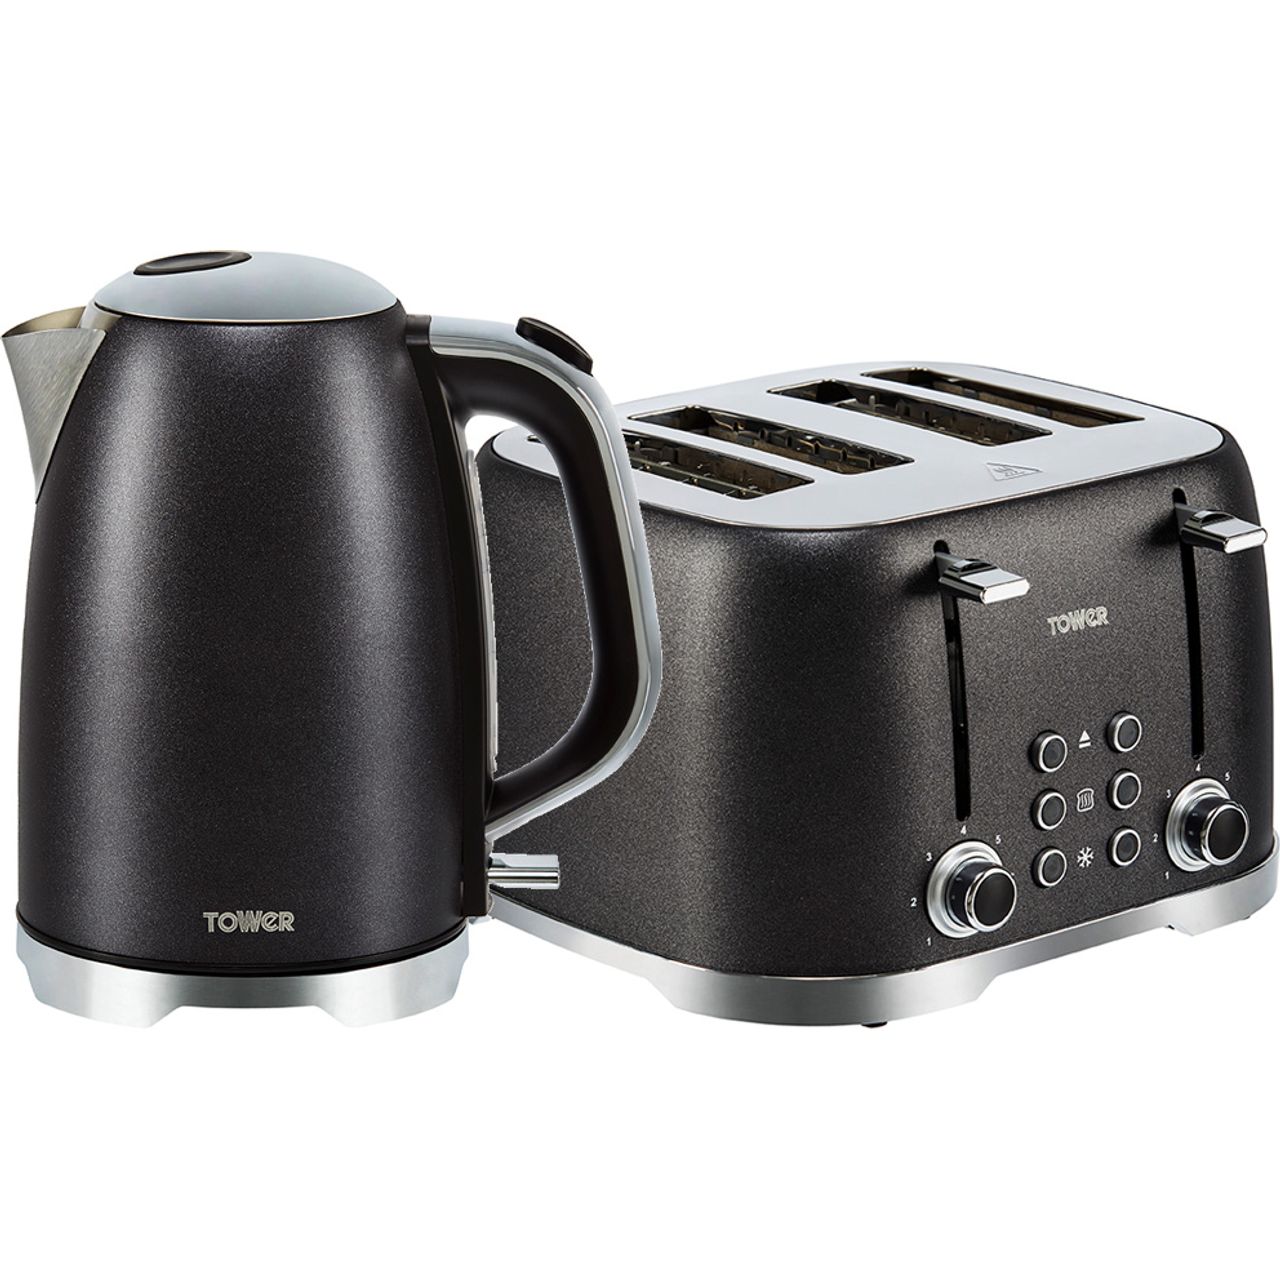 Tower Glitz AOBUNDLE006 Kettle And Toaster Sets Review